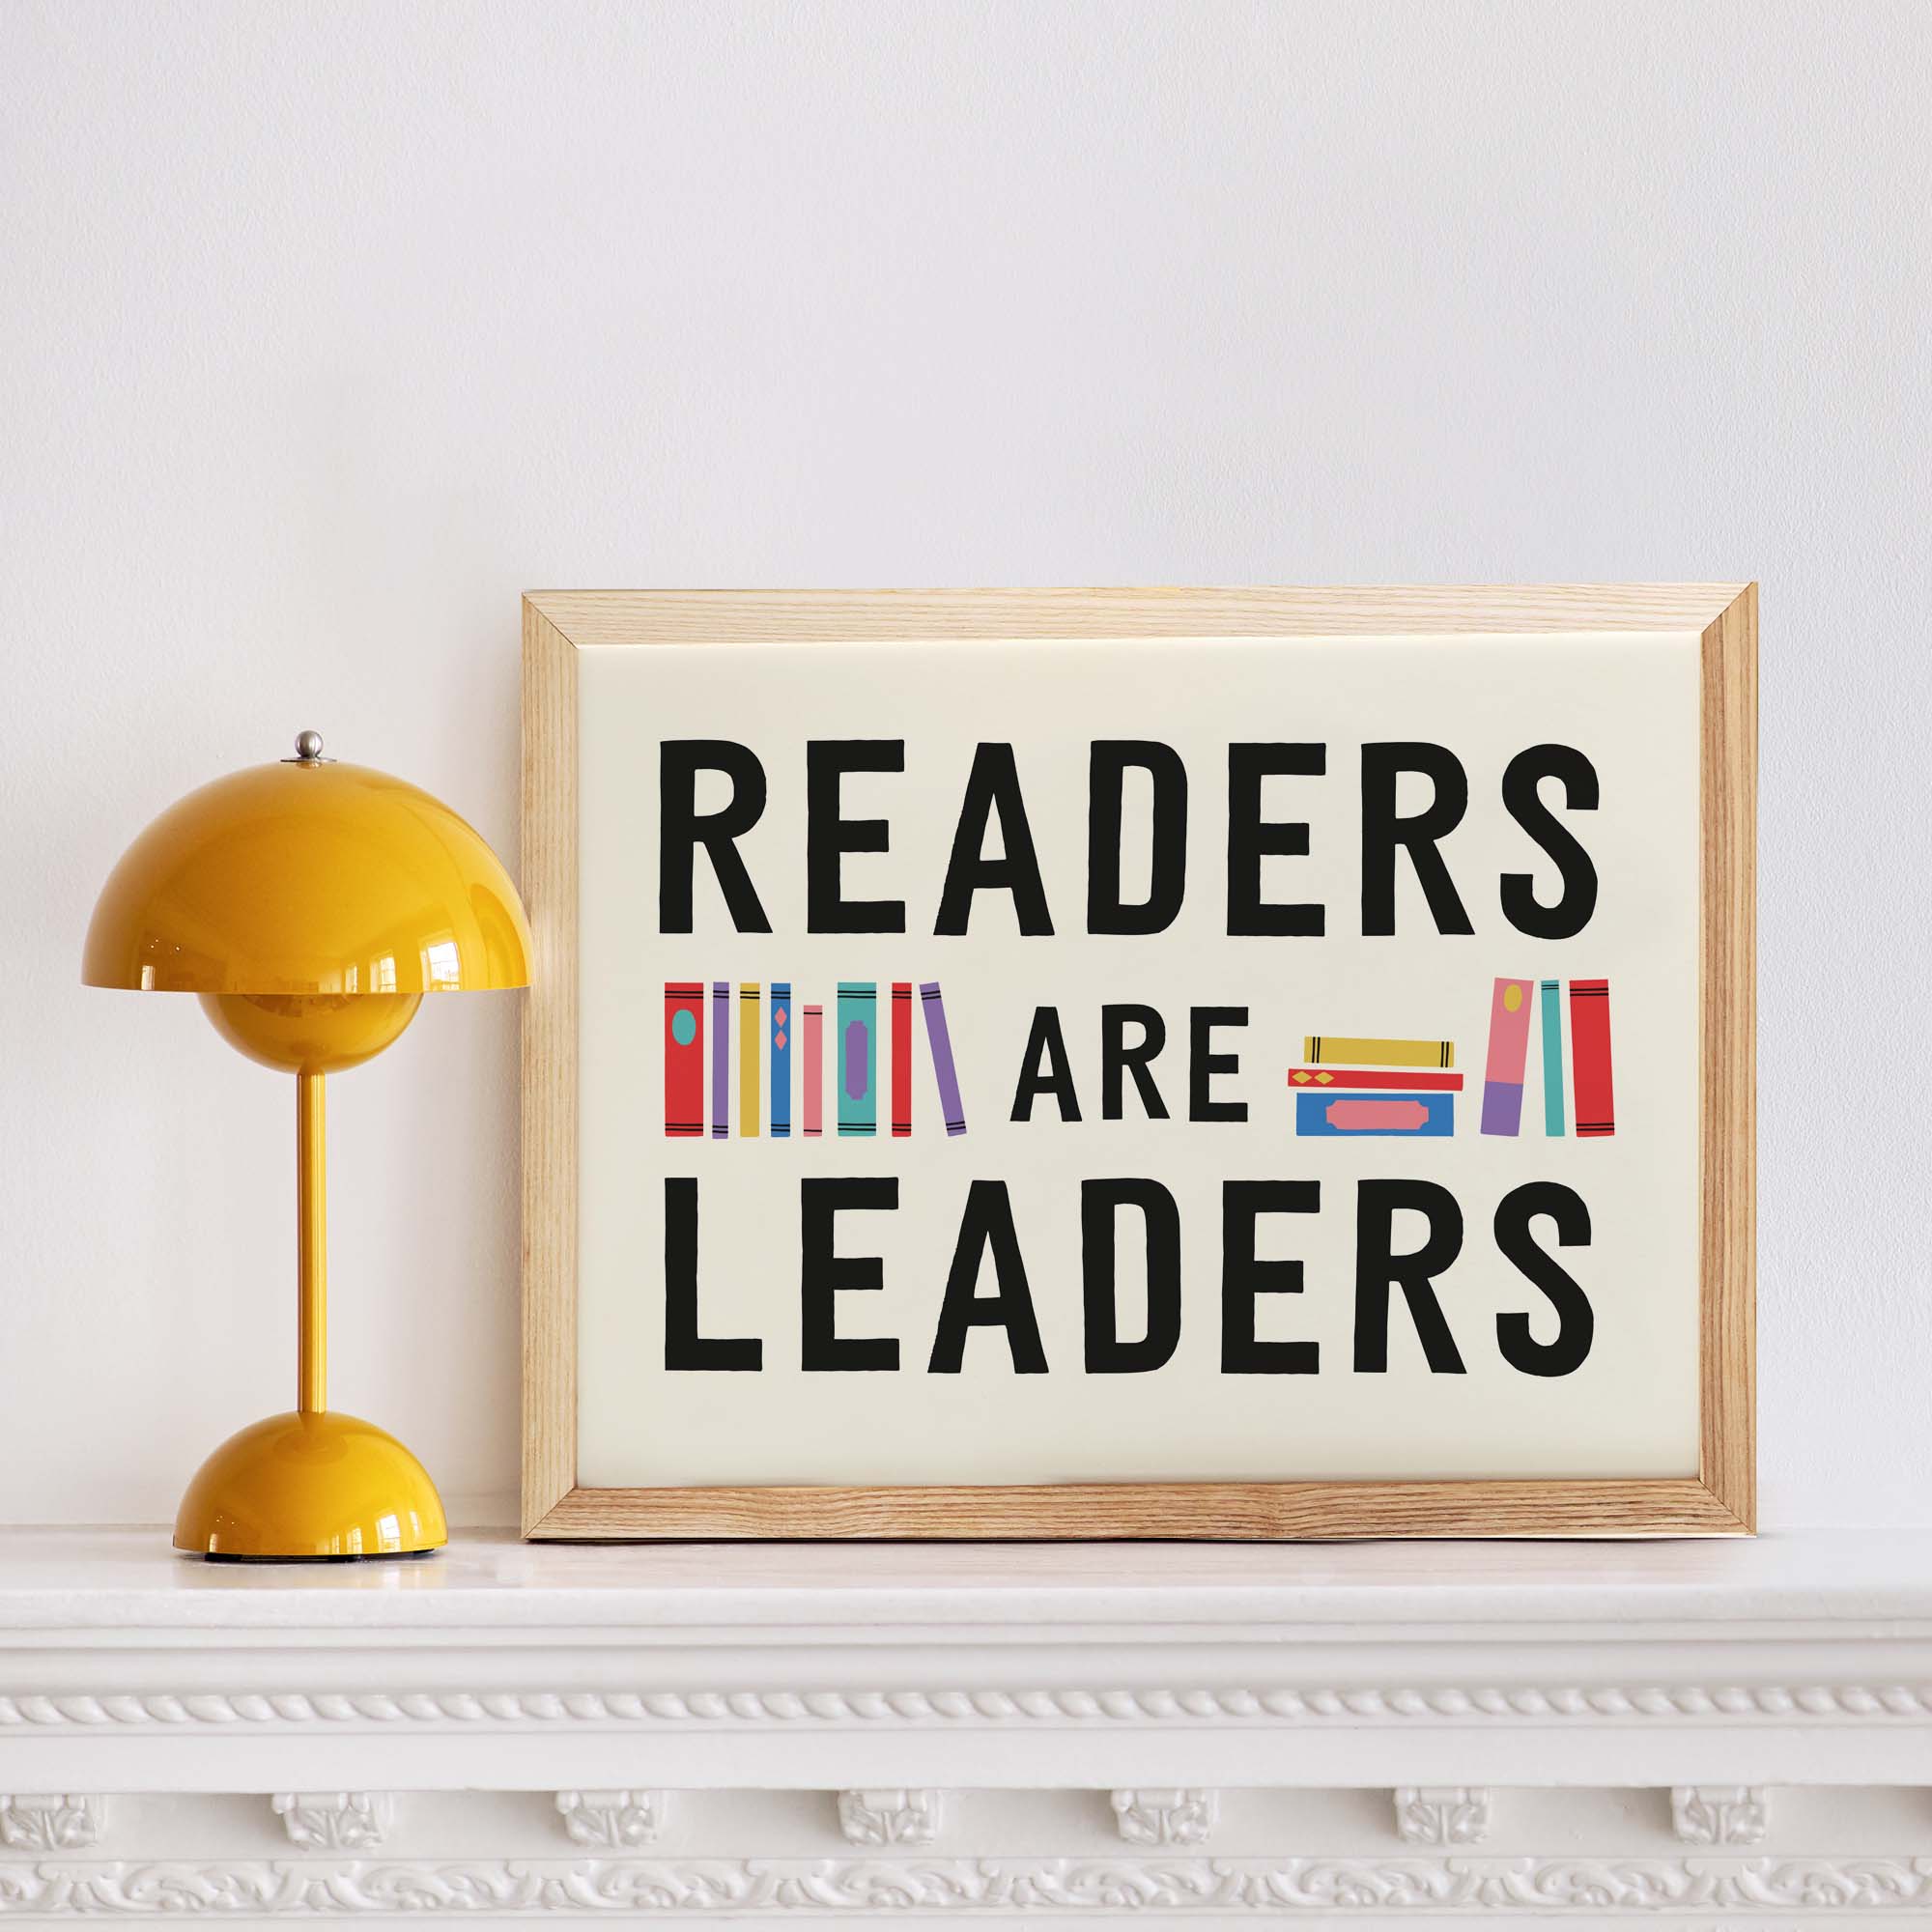 Readers Are Leaders Fine Art Print with Hanger